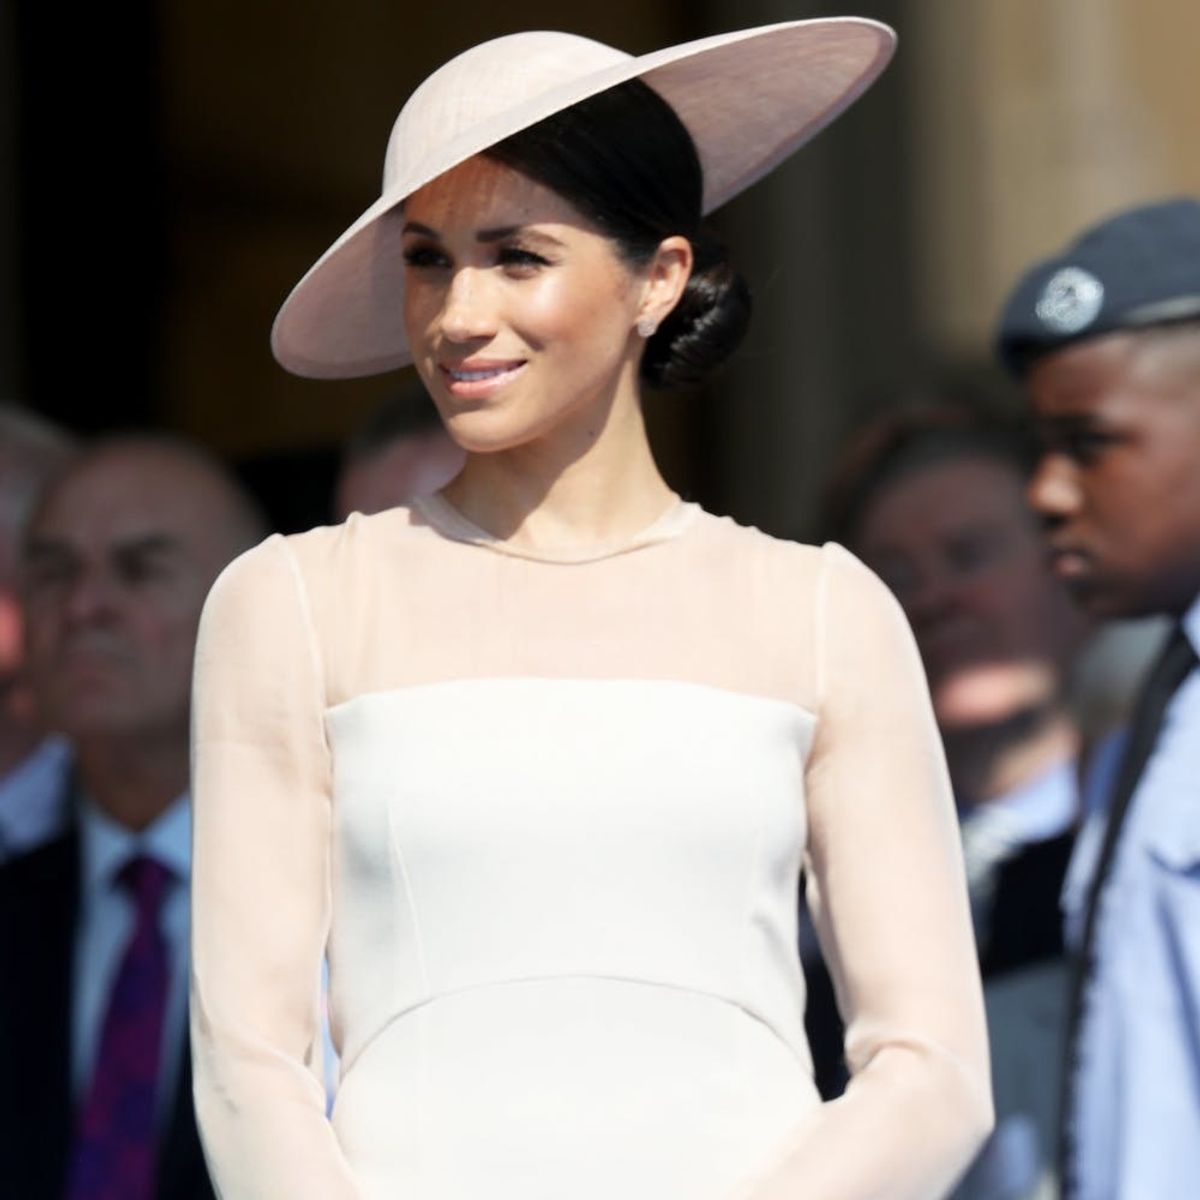 Meghan Markle Wears One of Kate Middleton’s Go-to Brands for Her First Public Appearance Post-Royal Wedding